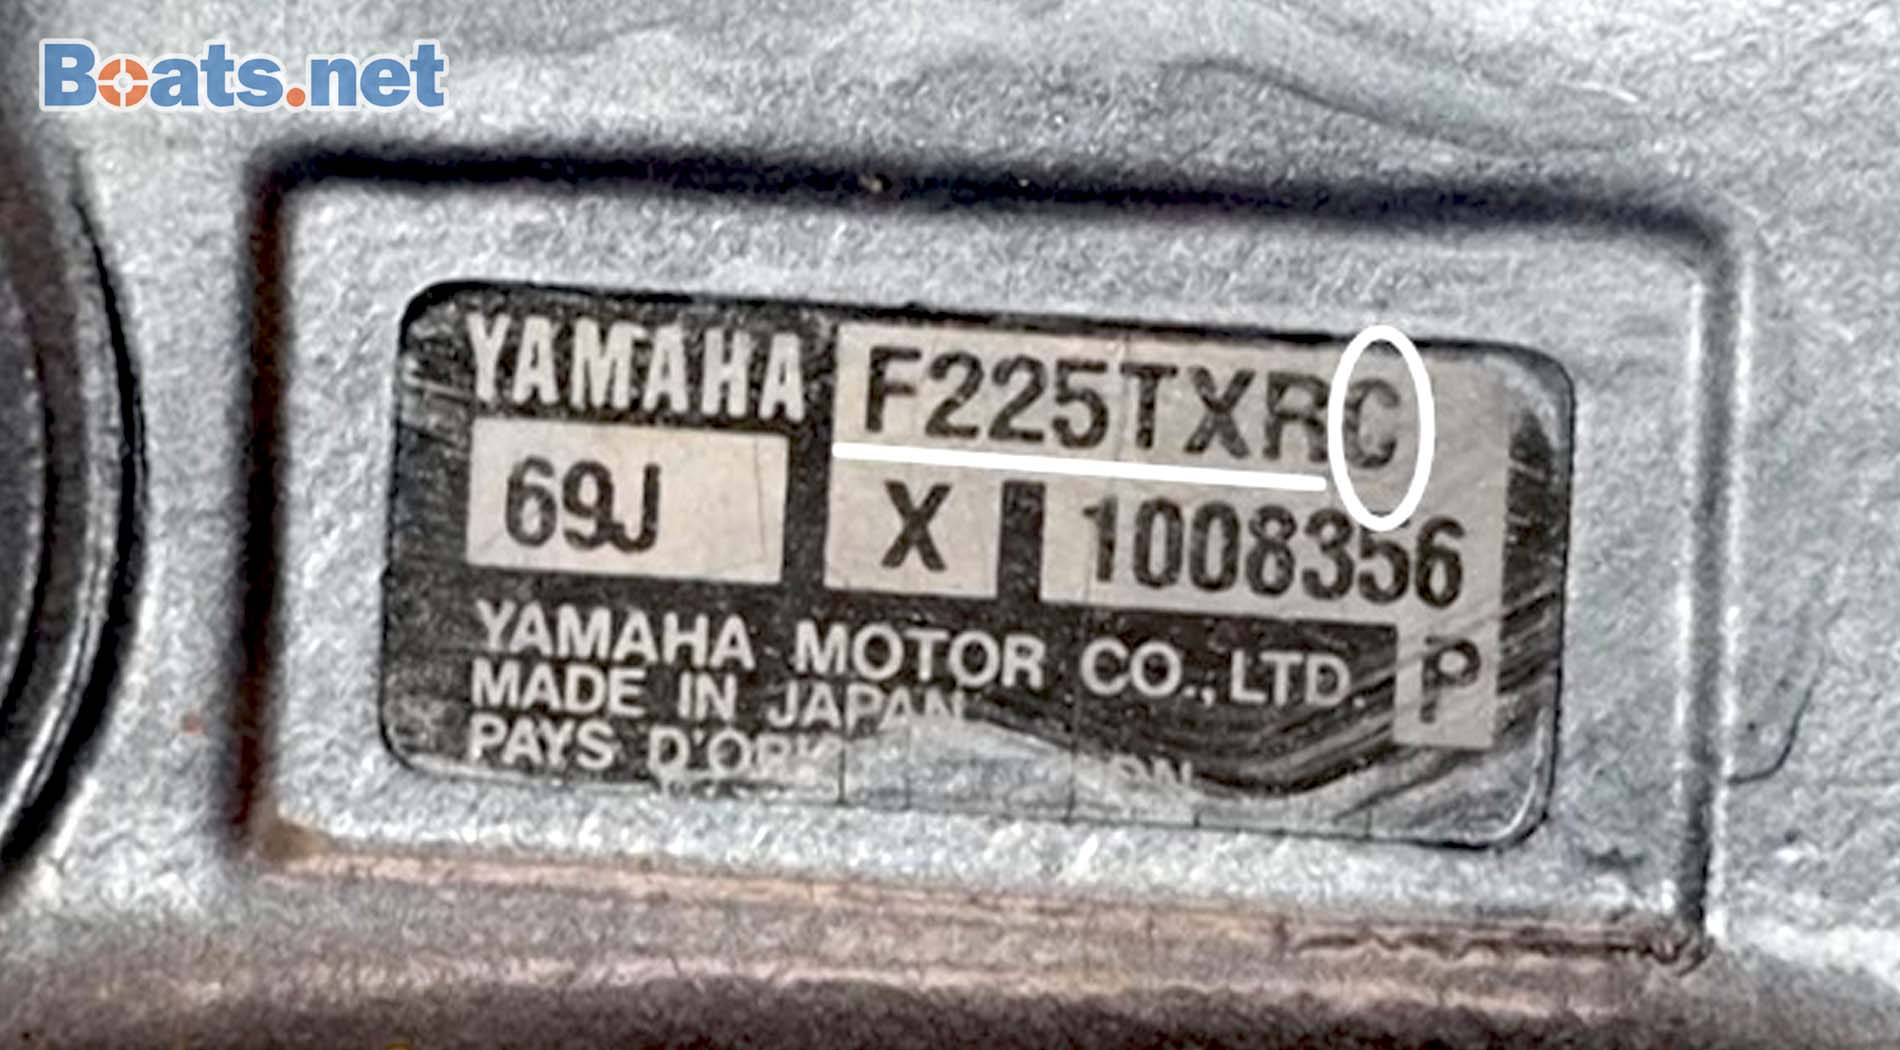 Yamaha outboard serial model number year